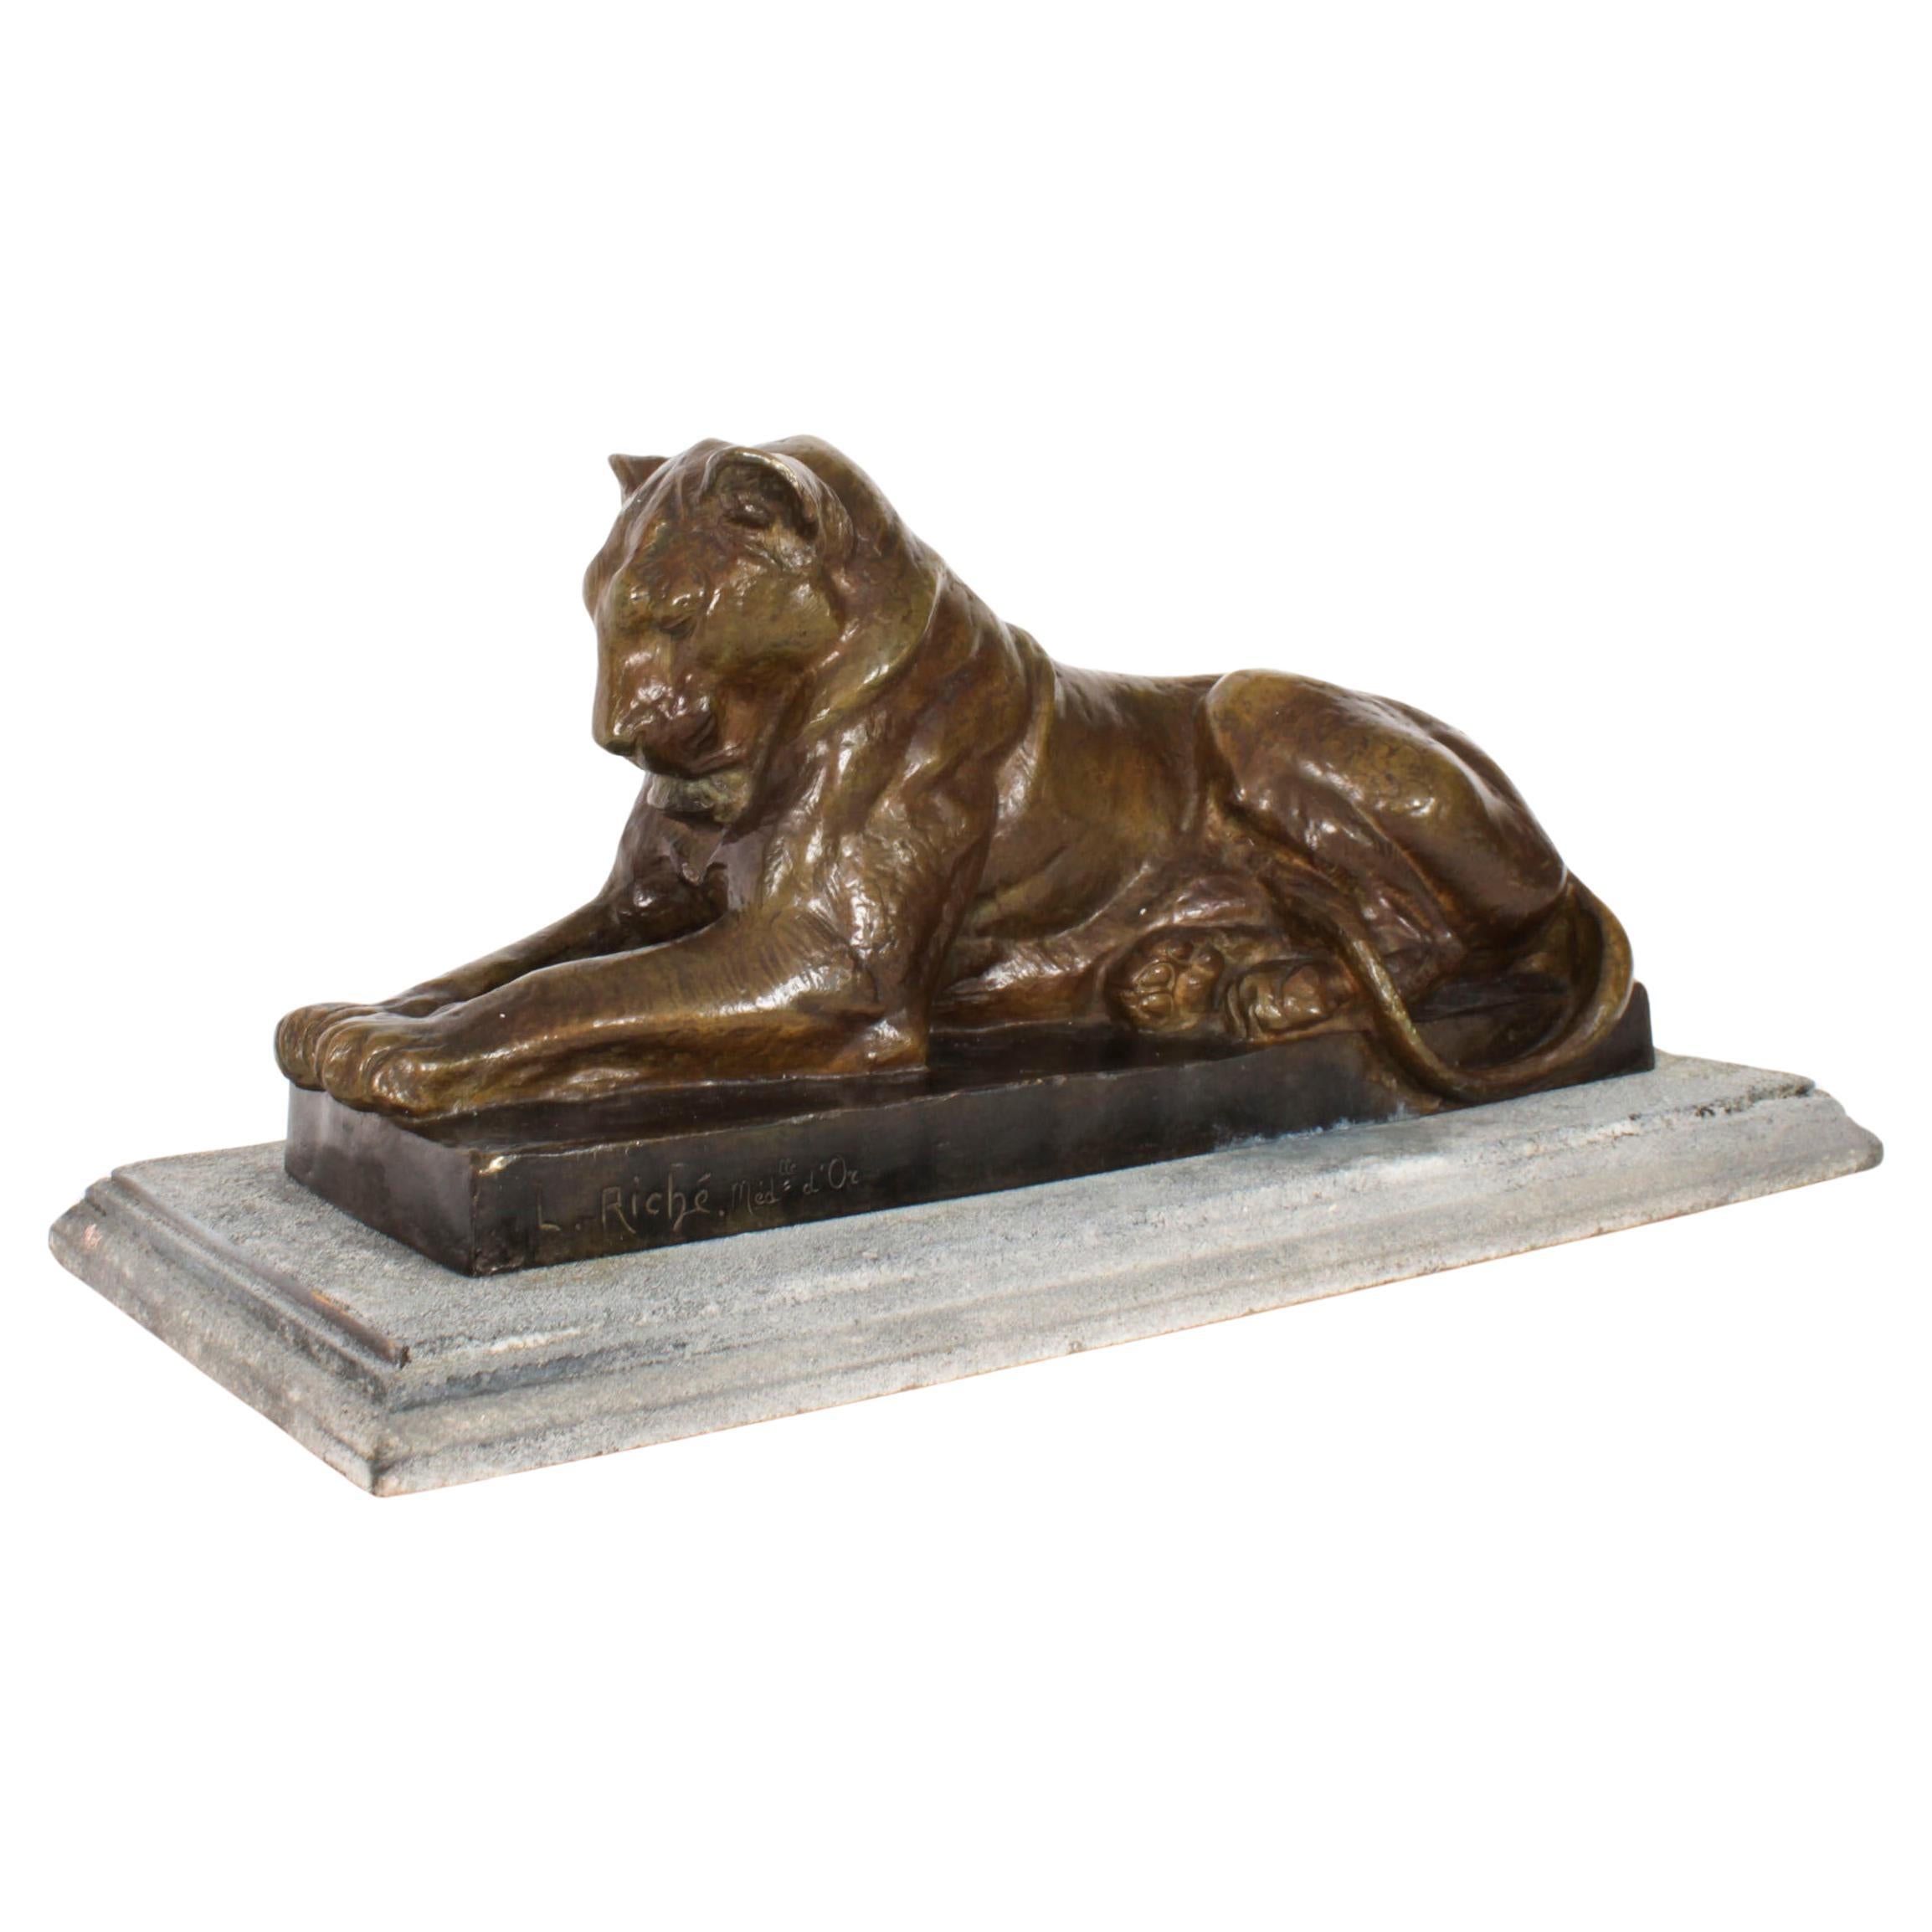 Antique French Bronze Sculpture of Lioness by Louis Riche Early 20th Century For Sale